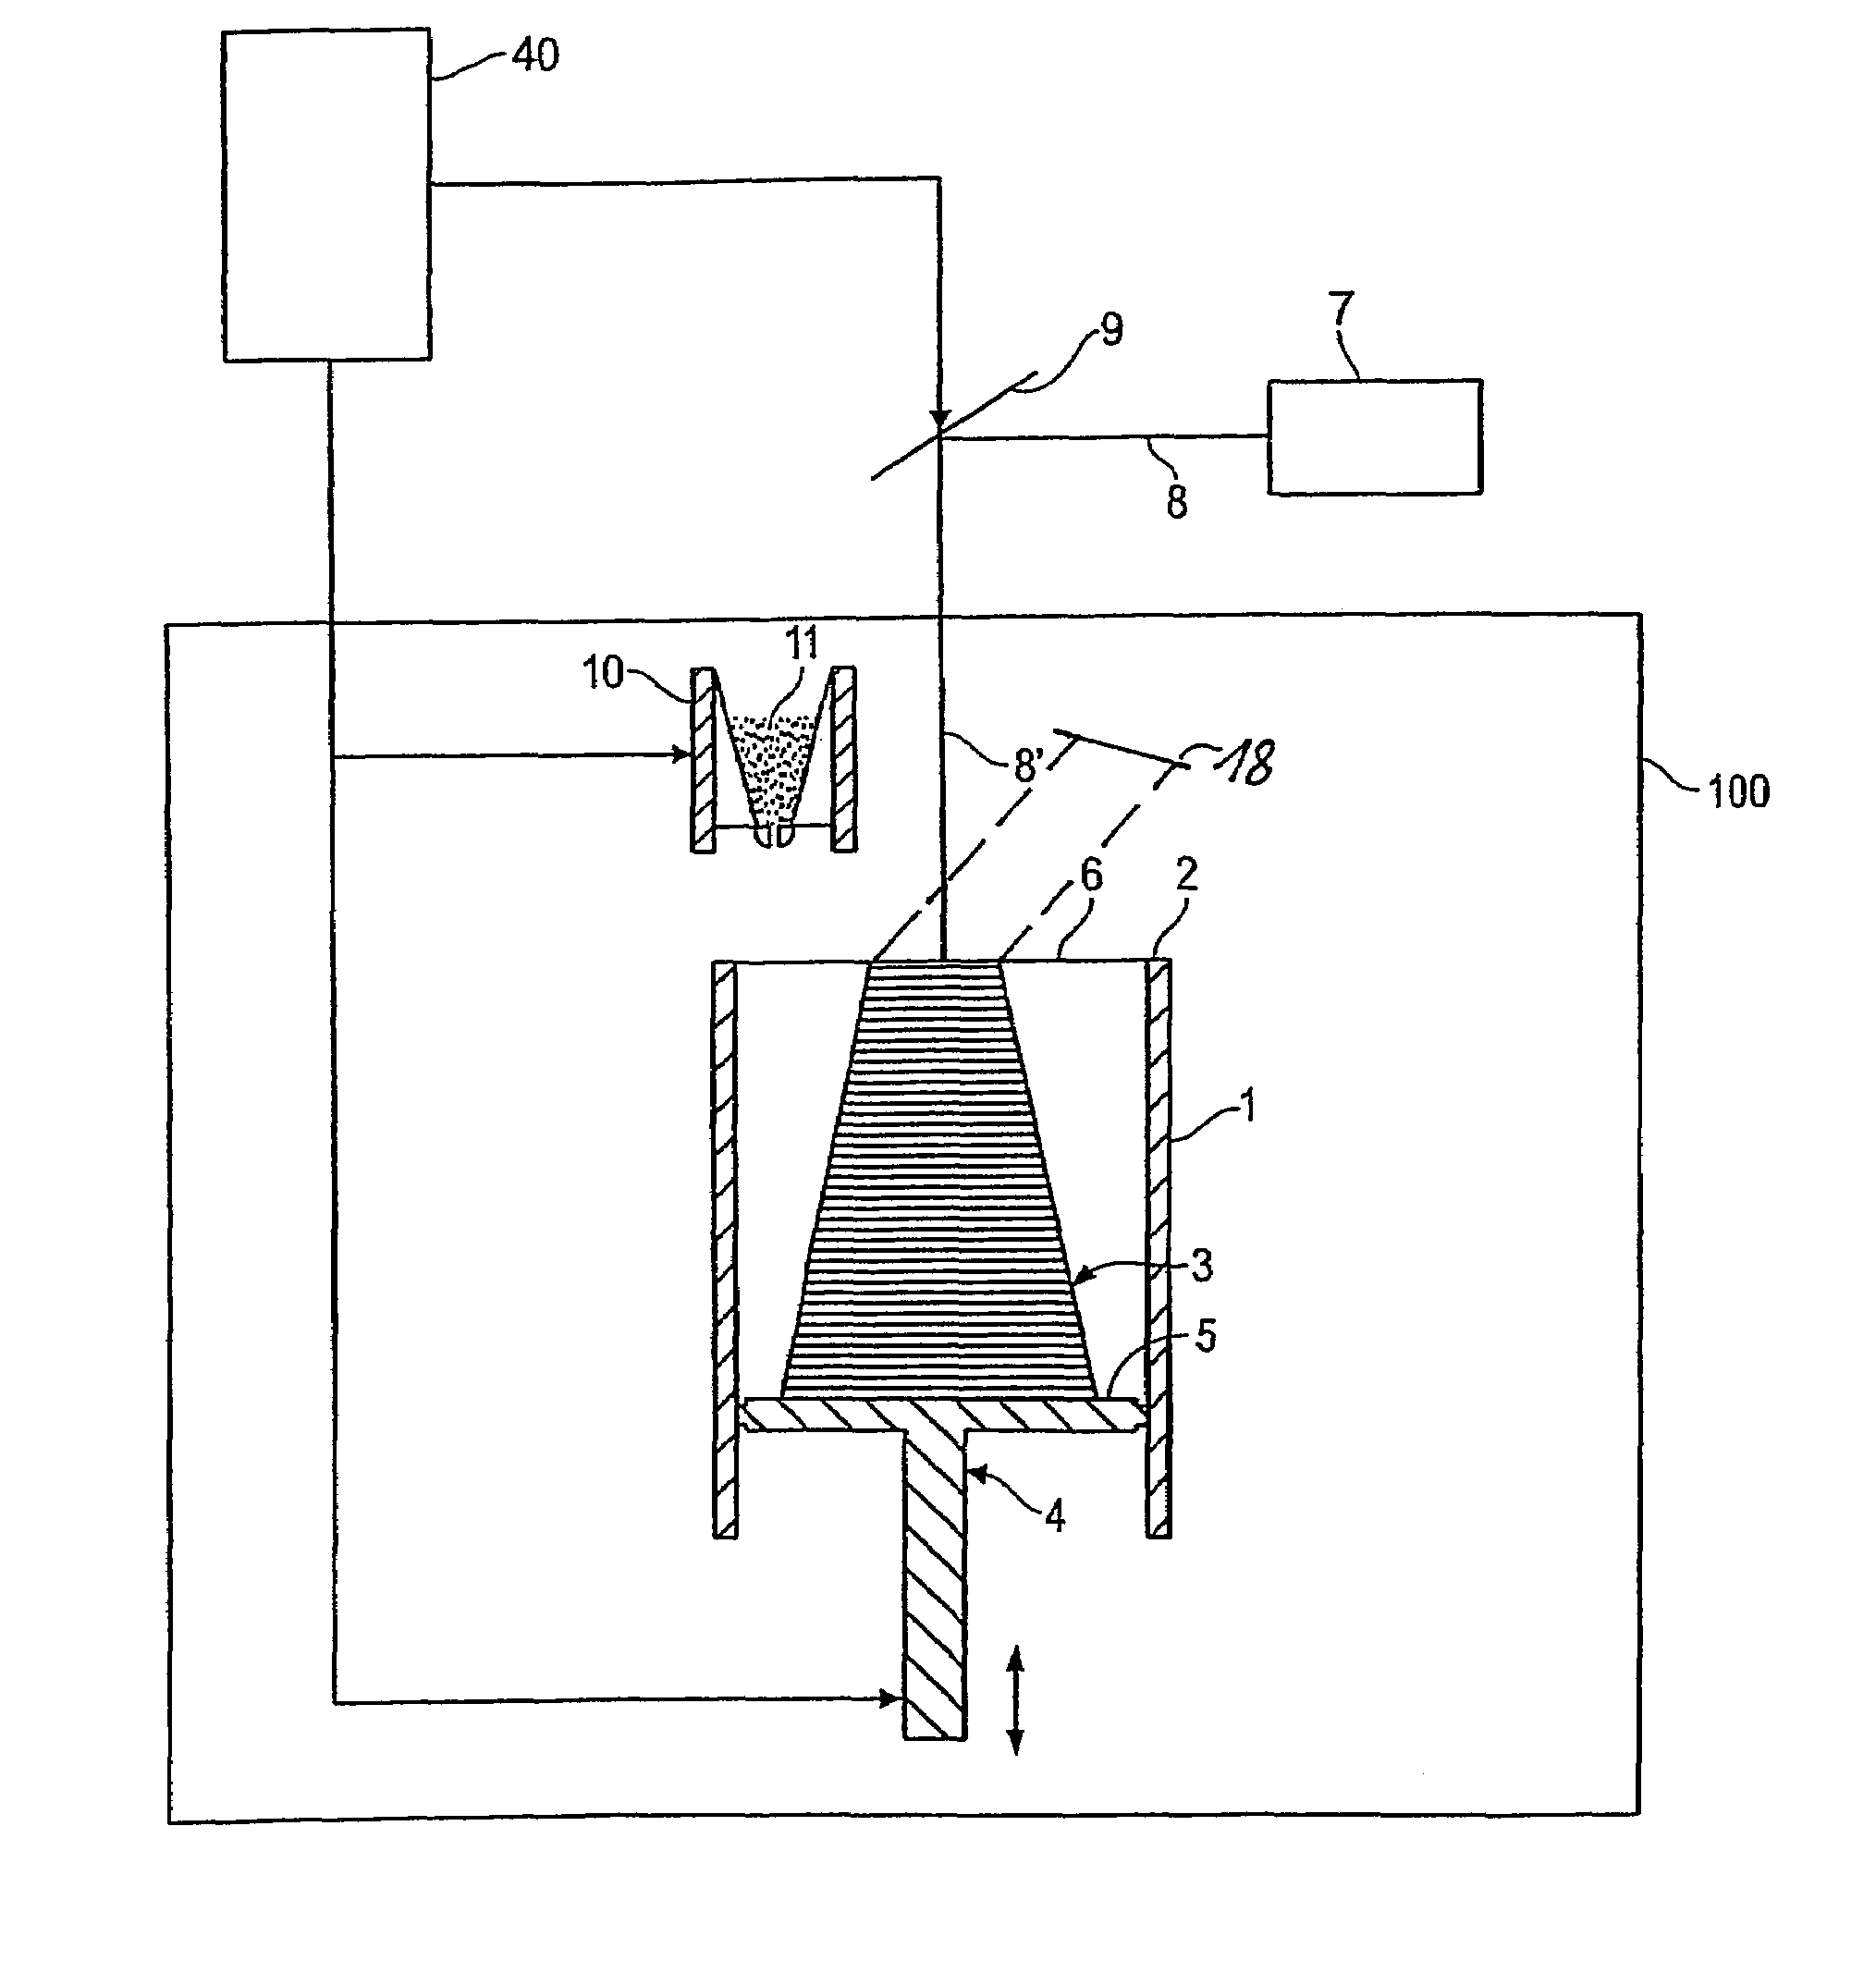 Method for a layer-wise manufacturing of a three-dimensional object